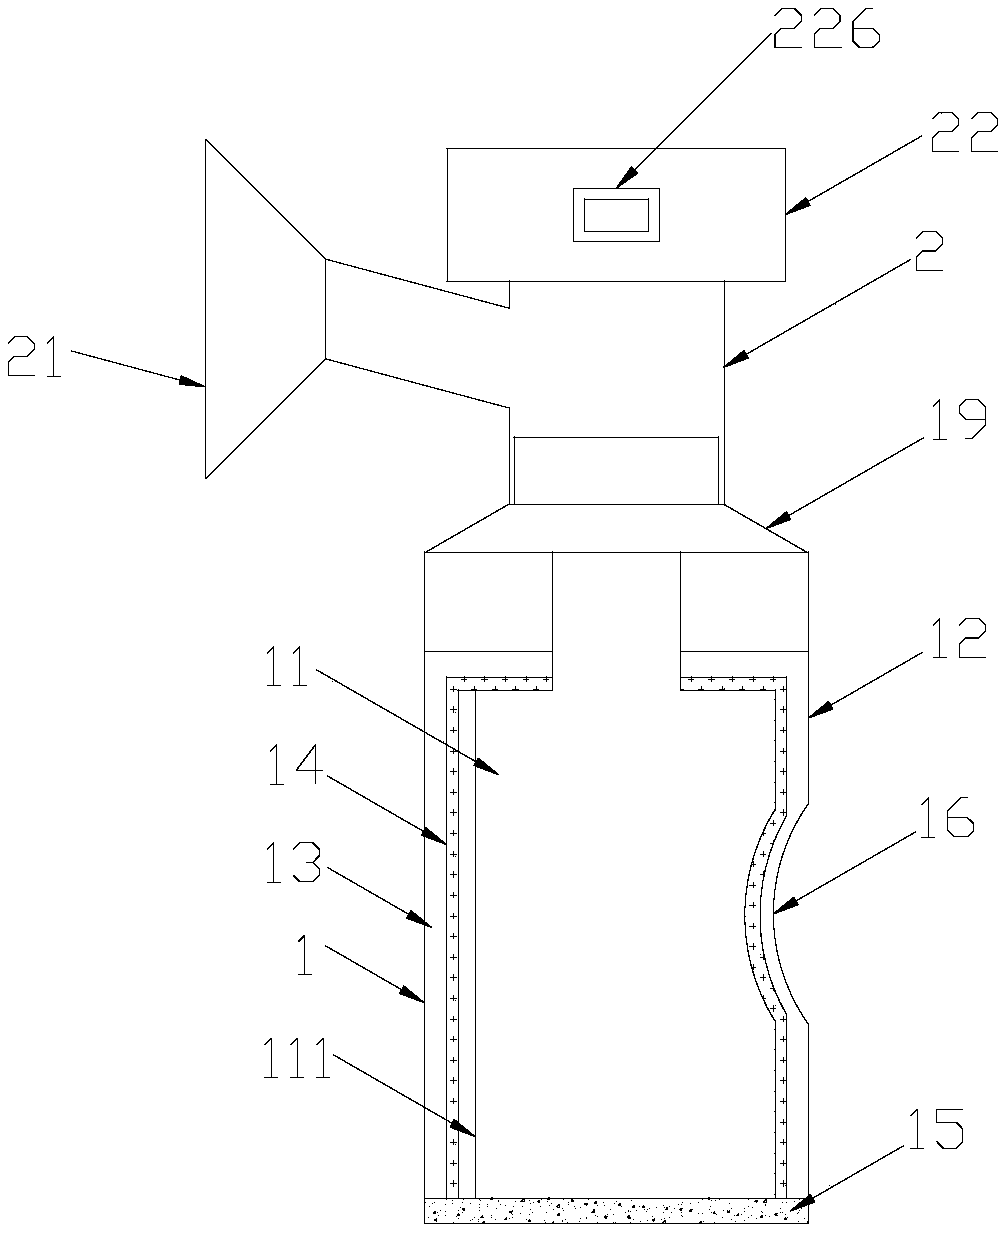 Breast milk collection device capable of controlling amount